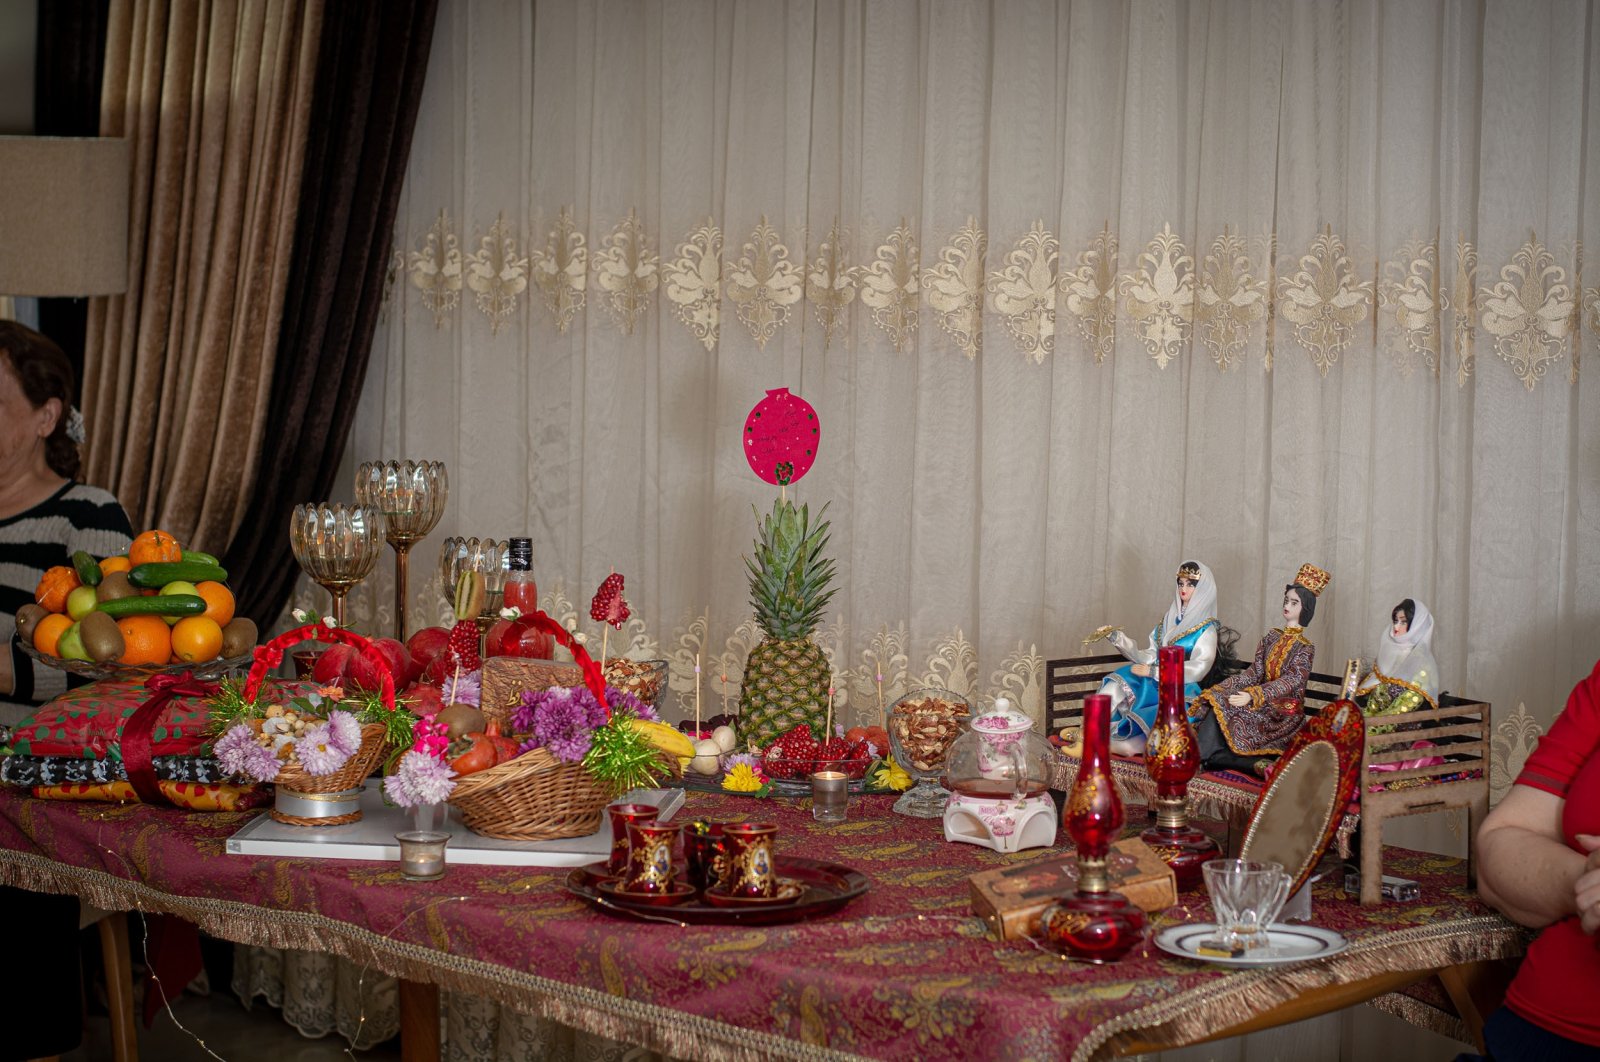 A Yalda Night table is prepared with gifts and fruits including pomegranate, watermelon, cakes and pastries, in line with a book by Hafez. (Shutterstock)